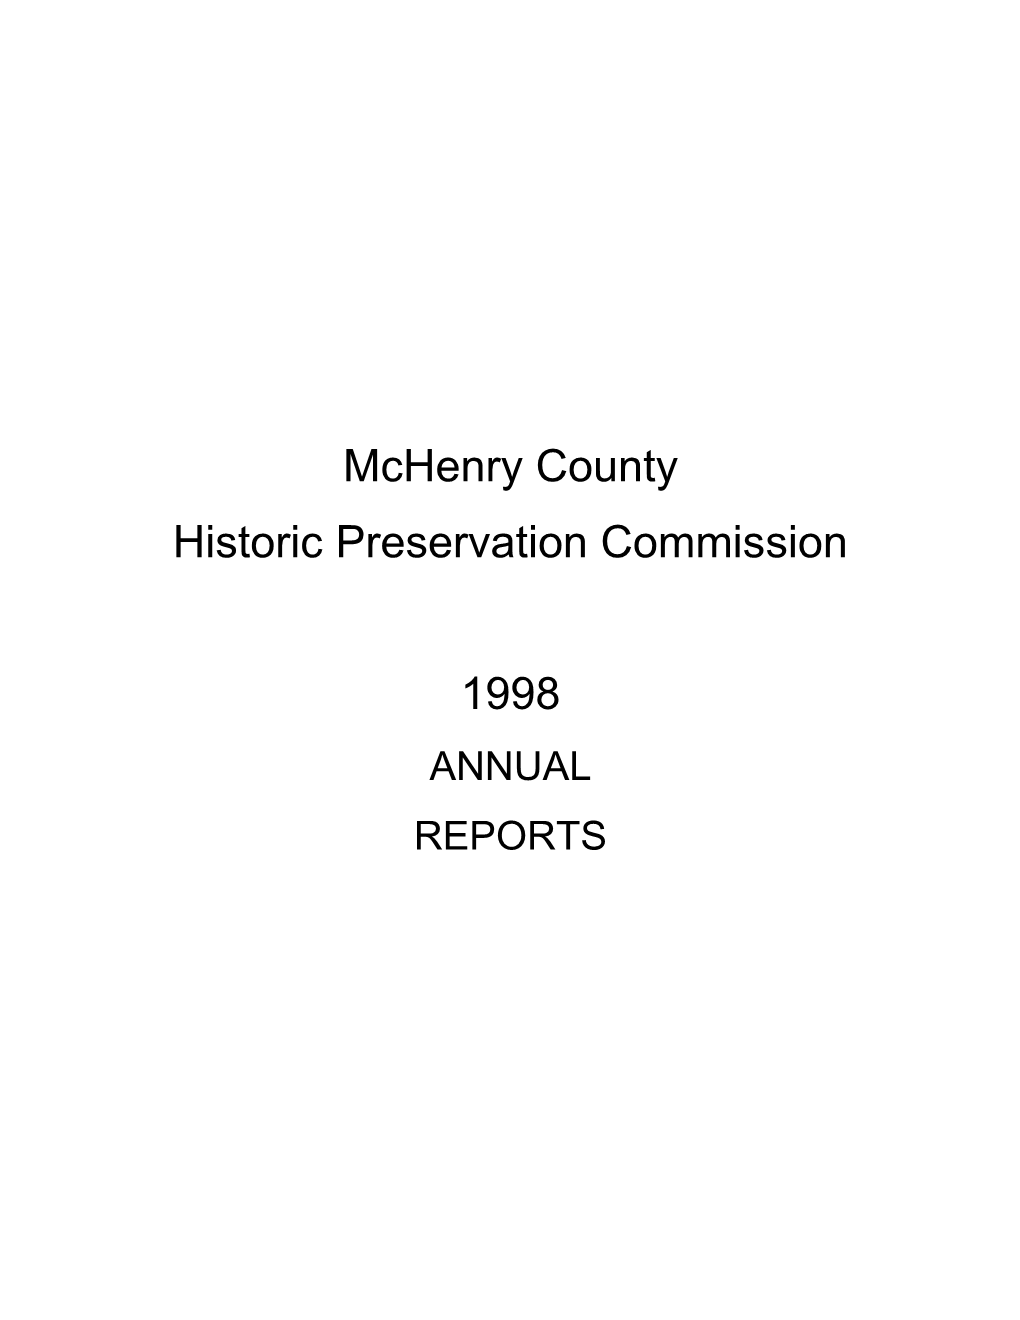 Mchenry County Historic Preservation Commission 1998